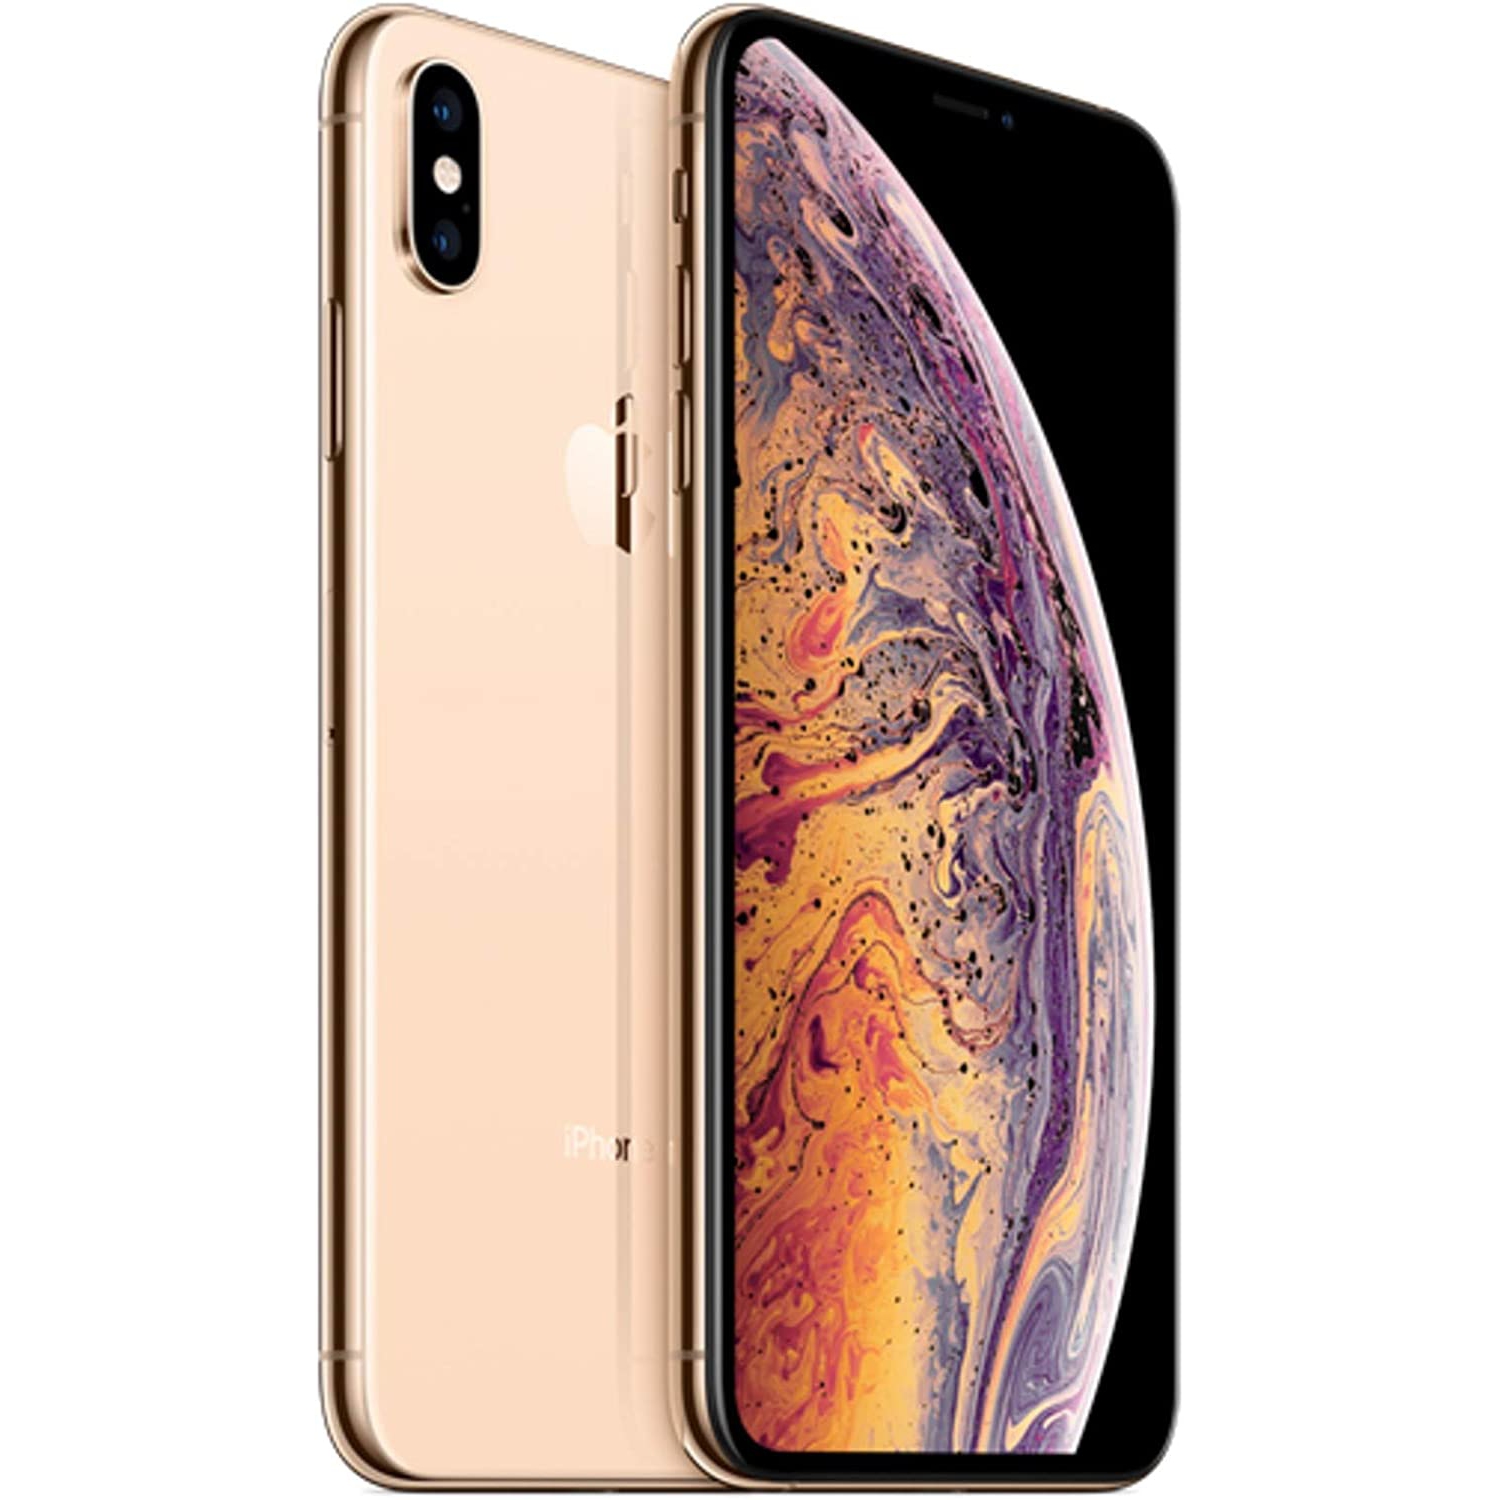 Refurbished (Excellent) - Apple iPhone XS Max | 64GB - Smartphone - Gold- Unlocked - Certified Refurbished